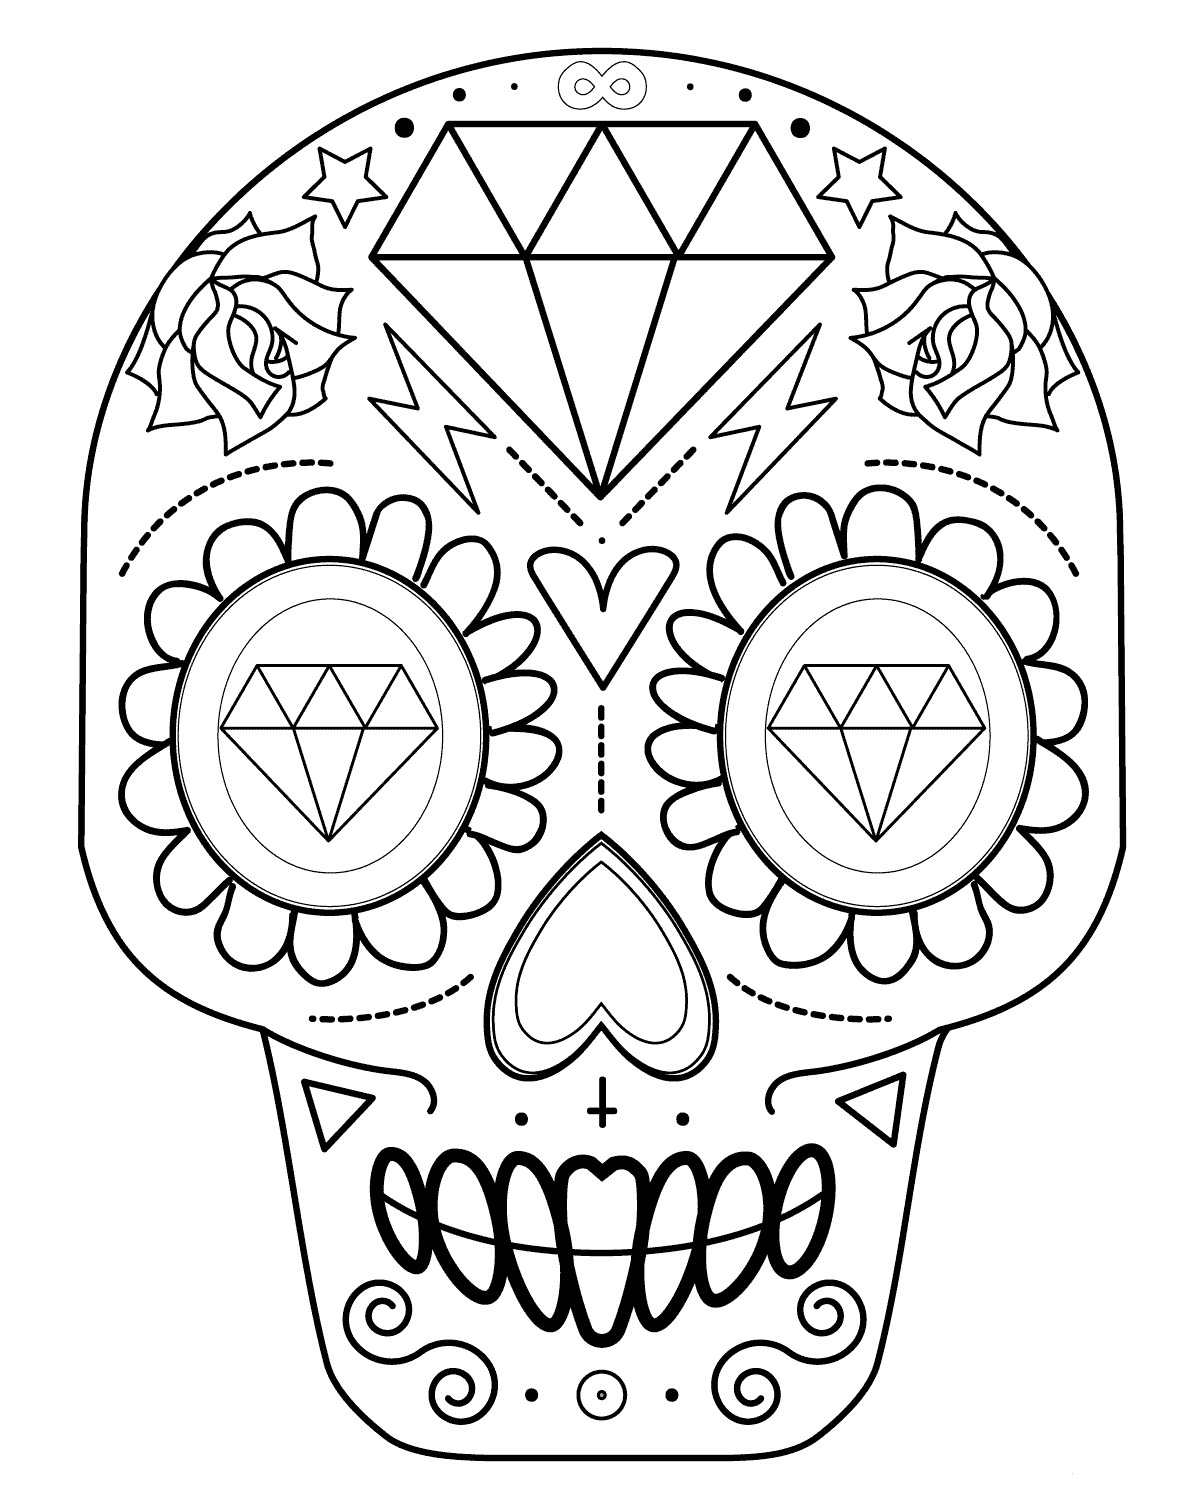 Sugar Skull Coloring Pages For Kids
 30 Free Printable Sugar Skull Coloring Pages